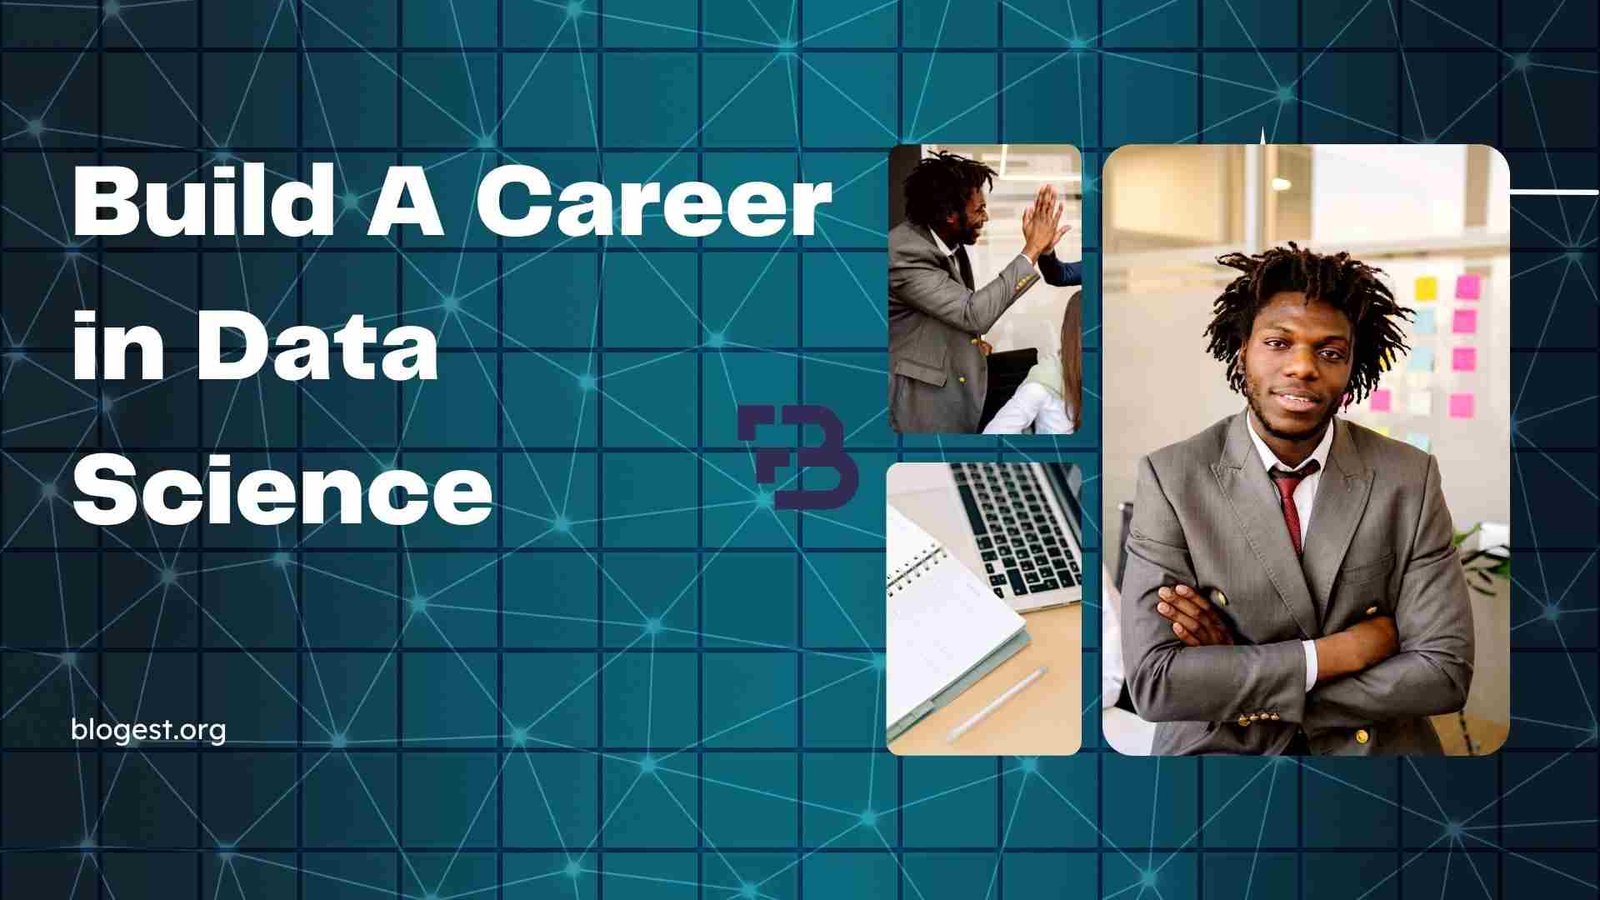 Build A Career in Data Science with Artificial Intelligence and Machine Learning